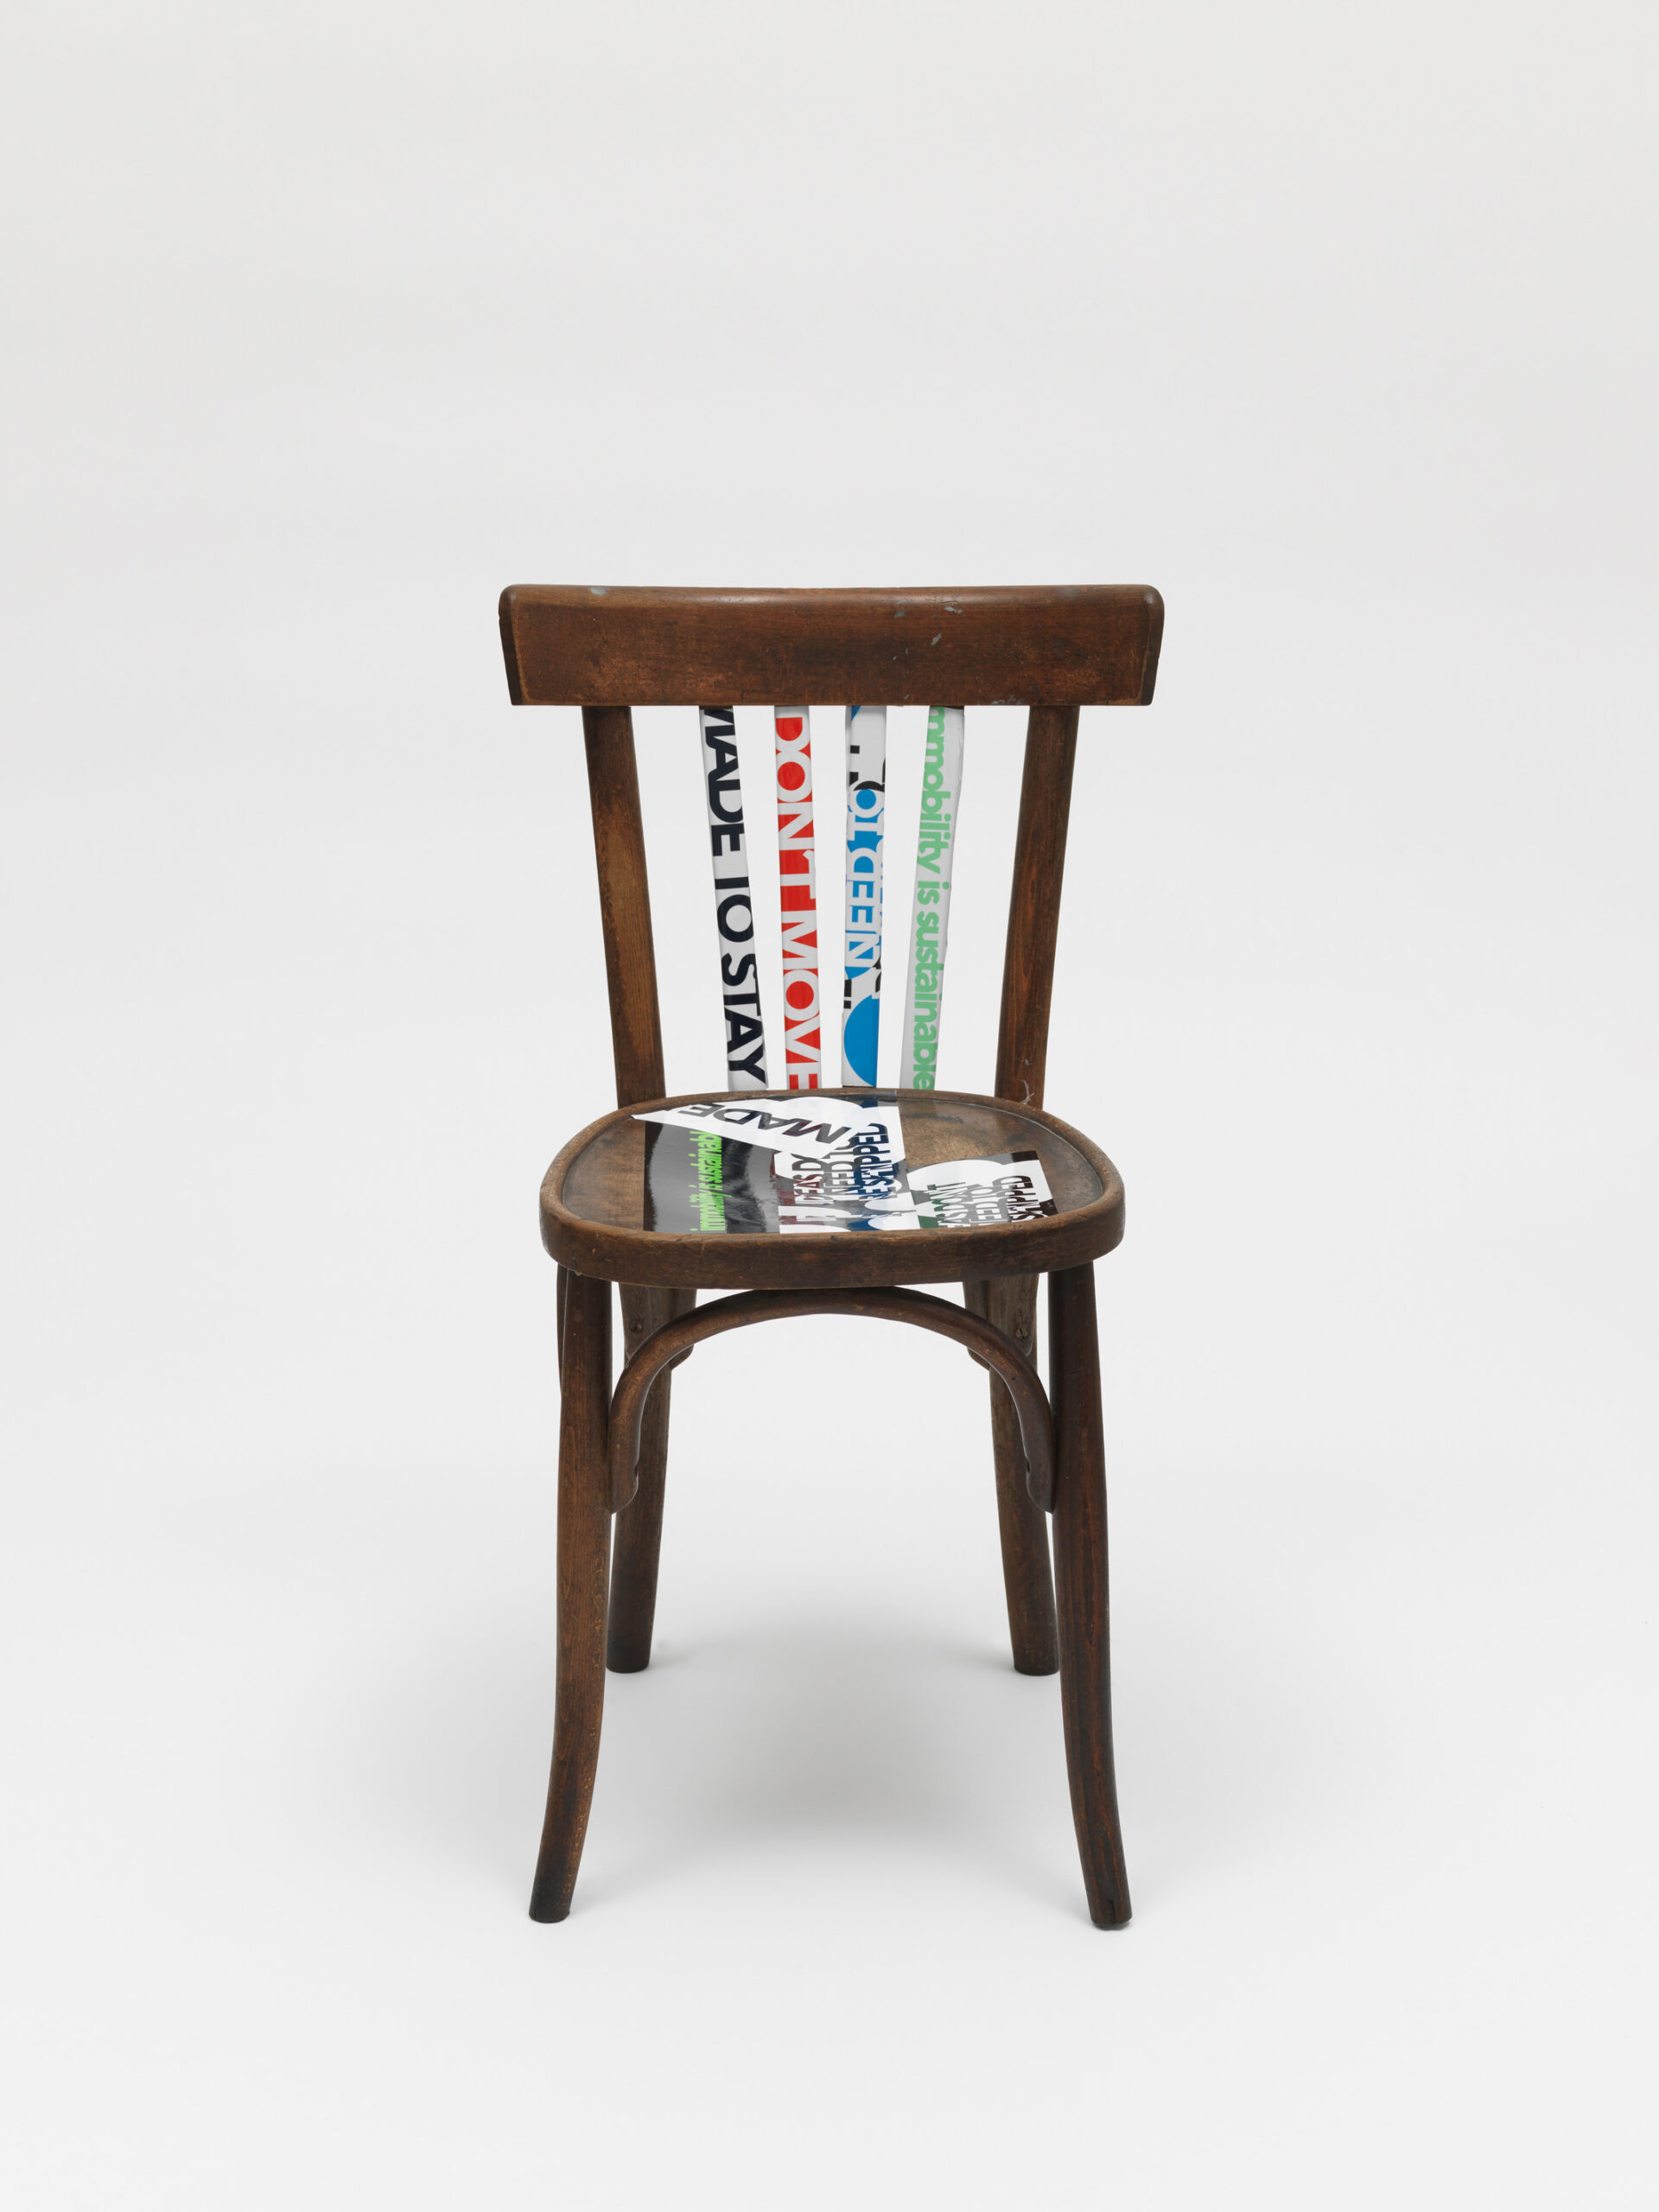 Product image: Kafeneion Chair, modified by Evi, claim stickers, 2022 Athens, 4.6 tons